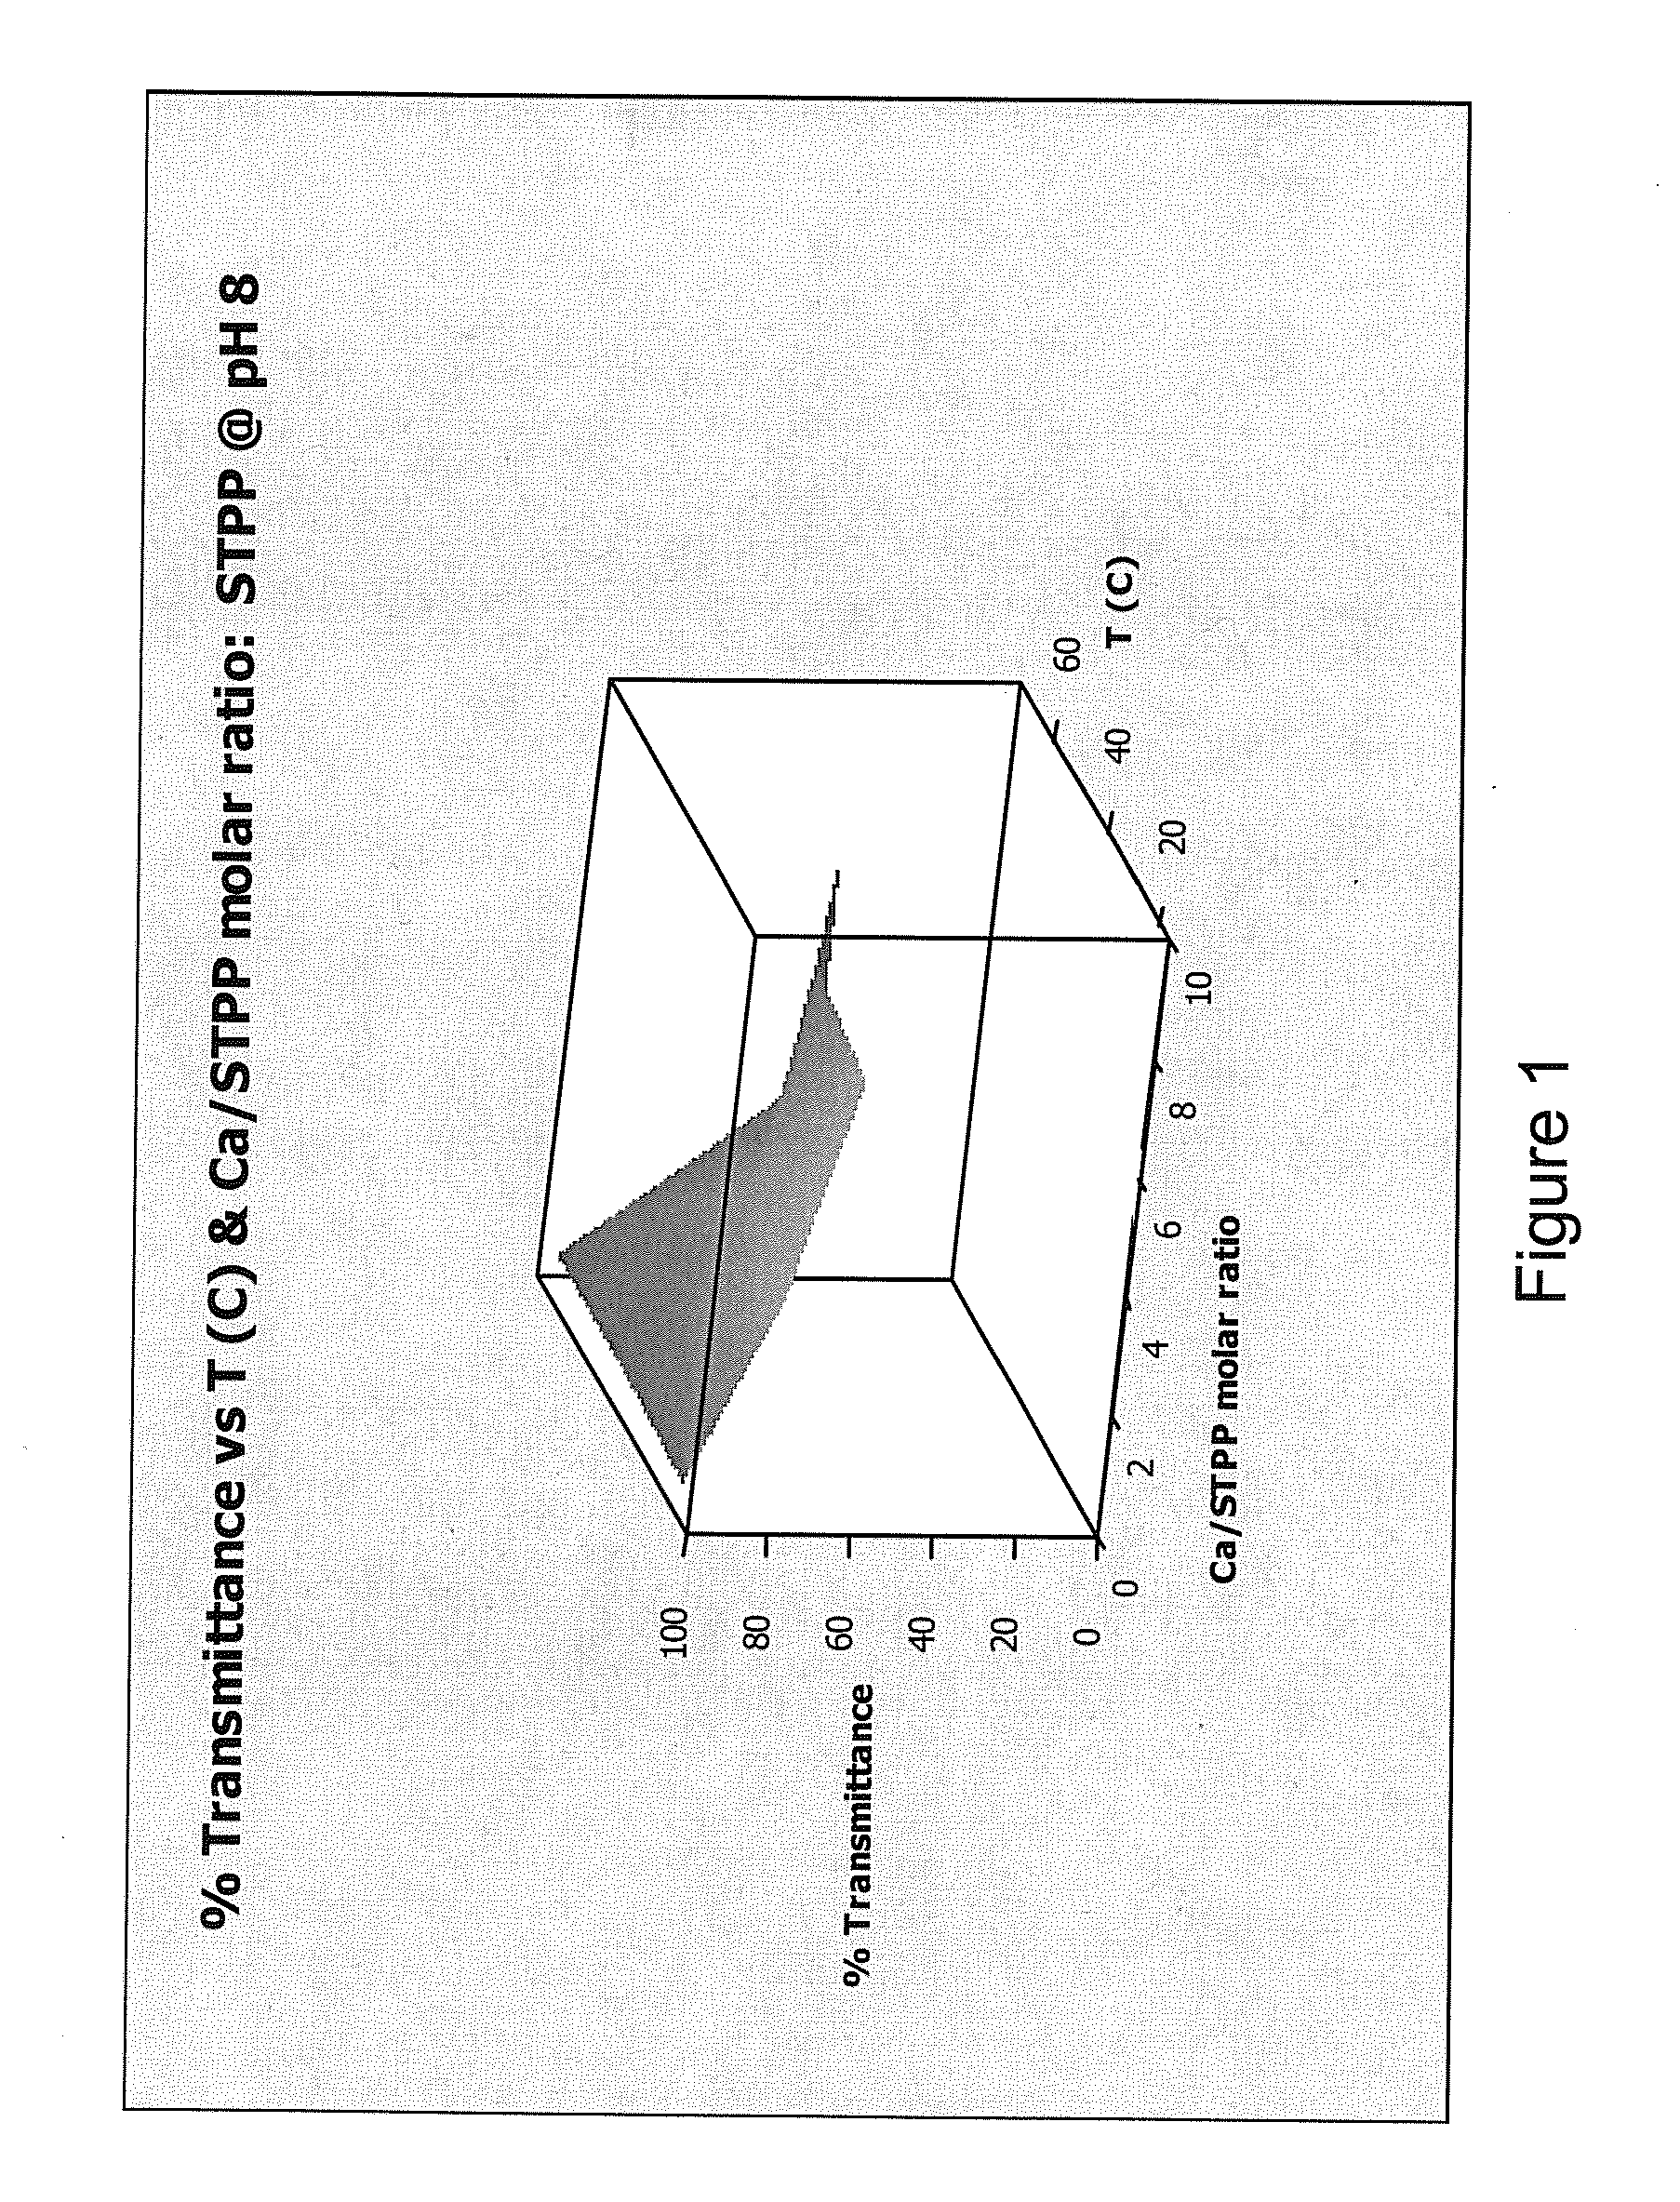 Cleaning compositions containing water soluble magnesium compounds and methods of using them